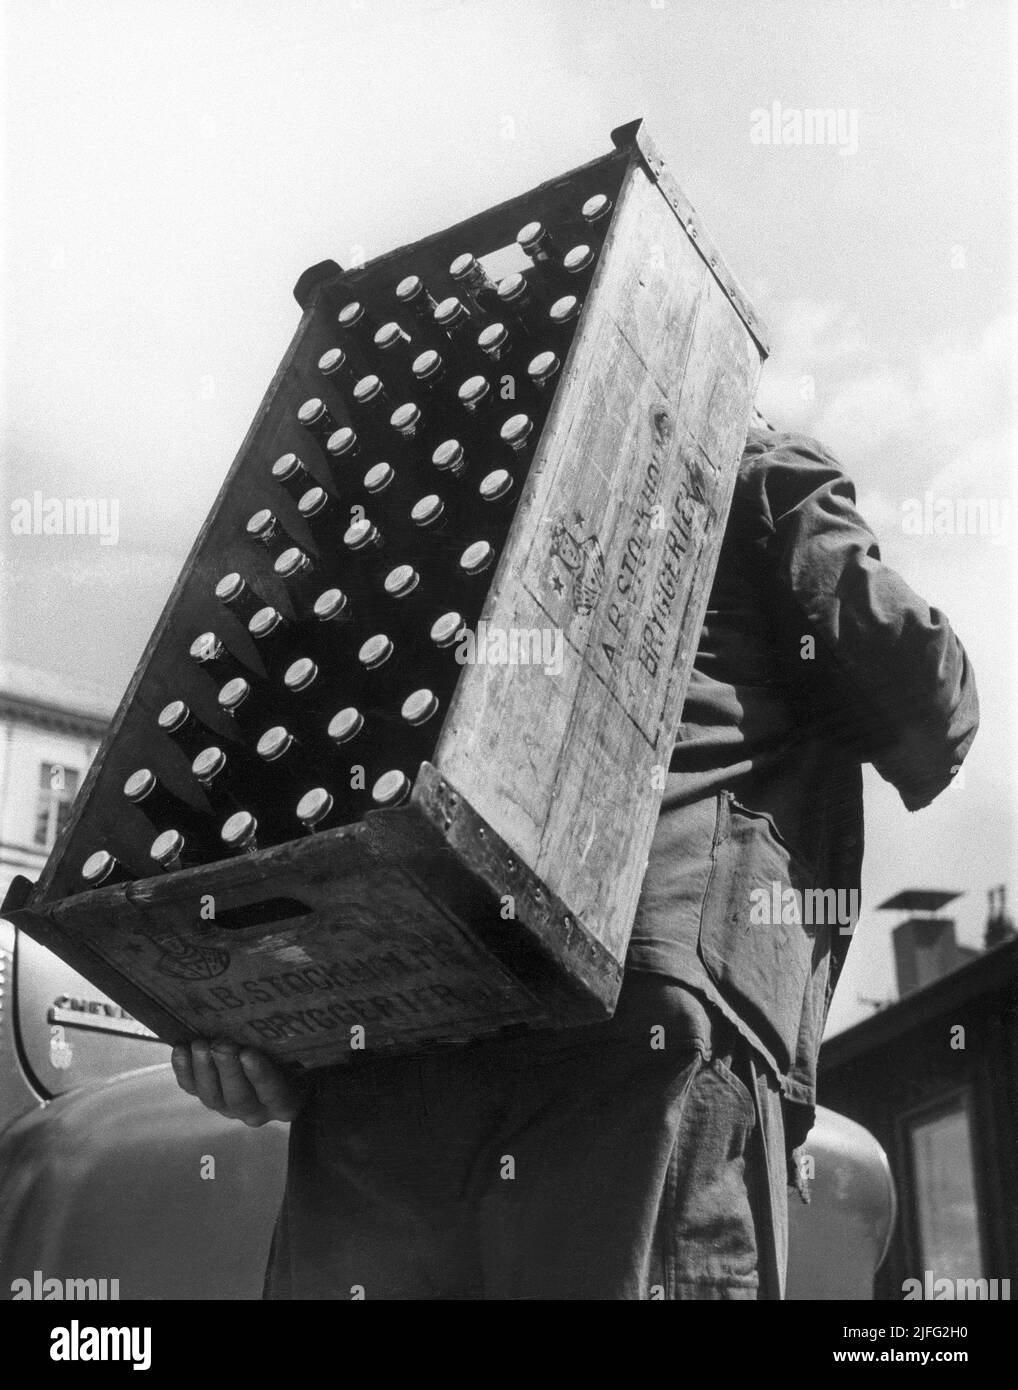 Beer history. A worker at the brewery Stockholms bryggerier carrying a wooden storage box with that contains 50 33 cl bottles of beer. The beer was distributed this way to stores and to restaurants. It was nicknamed 'Sofa'. Stockholsm bryggerier started in the 1870s and was a cooperation with other Stockholm breweries to create a monopoly to encrease prices of beer and to to achieve higher profitability. This monopoly lasted until the 1950s when the law prohibited breweries from having a cartel.  Sweden 1940s. Stock Photo